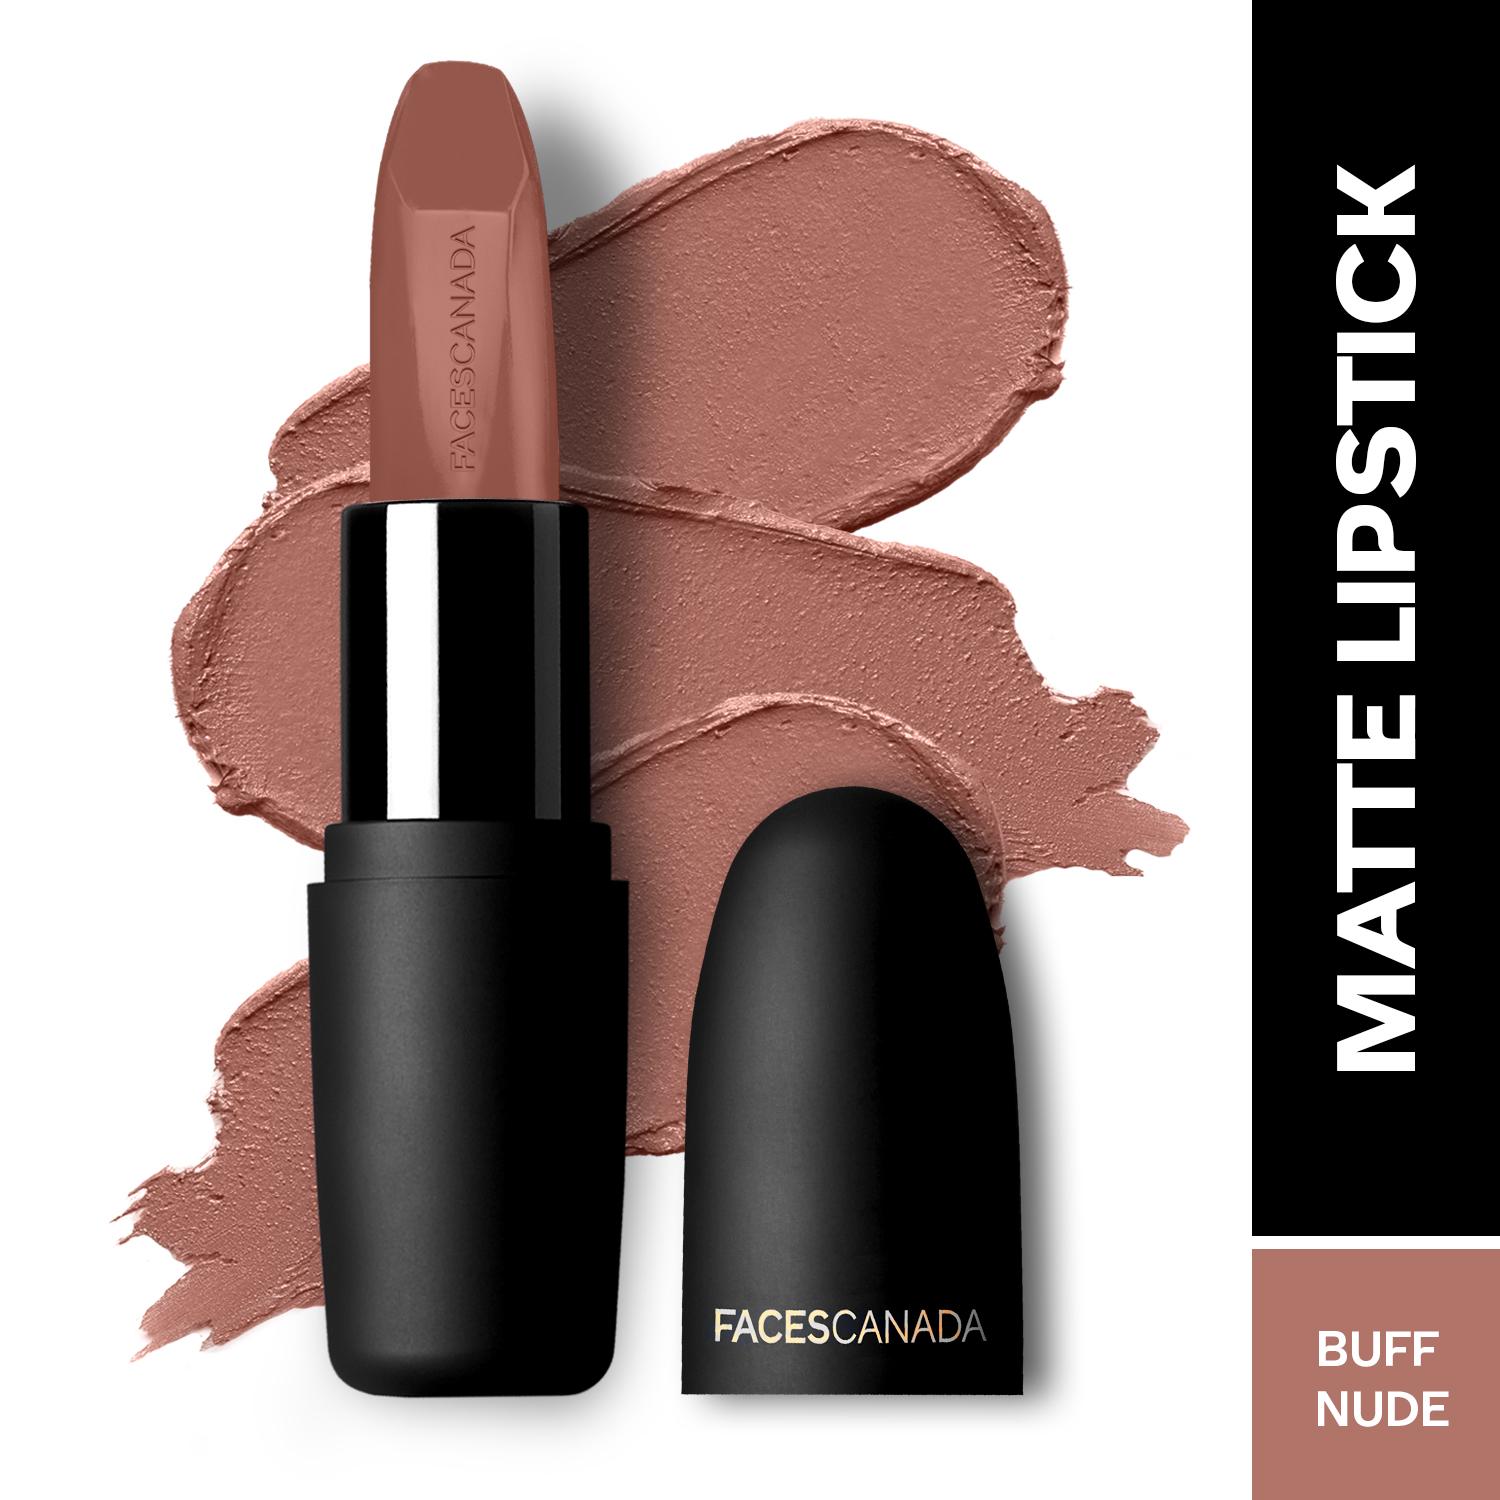 Faces Canada | Faces Canada Weightless Matte Lipstick, Pigmented and Hydrated Lips - Buff Nude 05 (4.5 g)